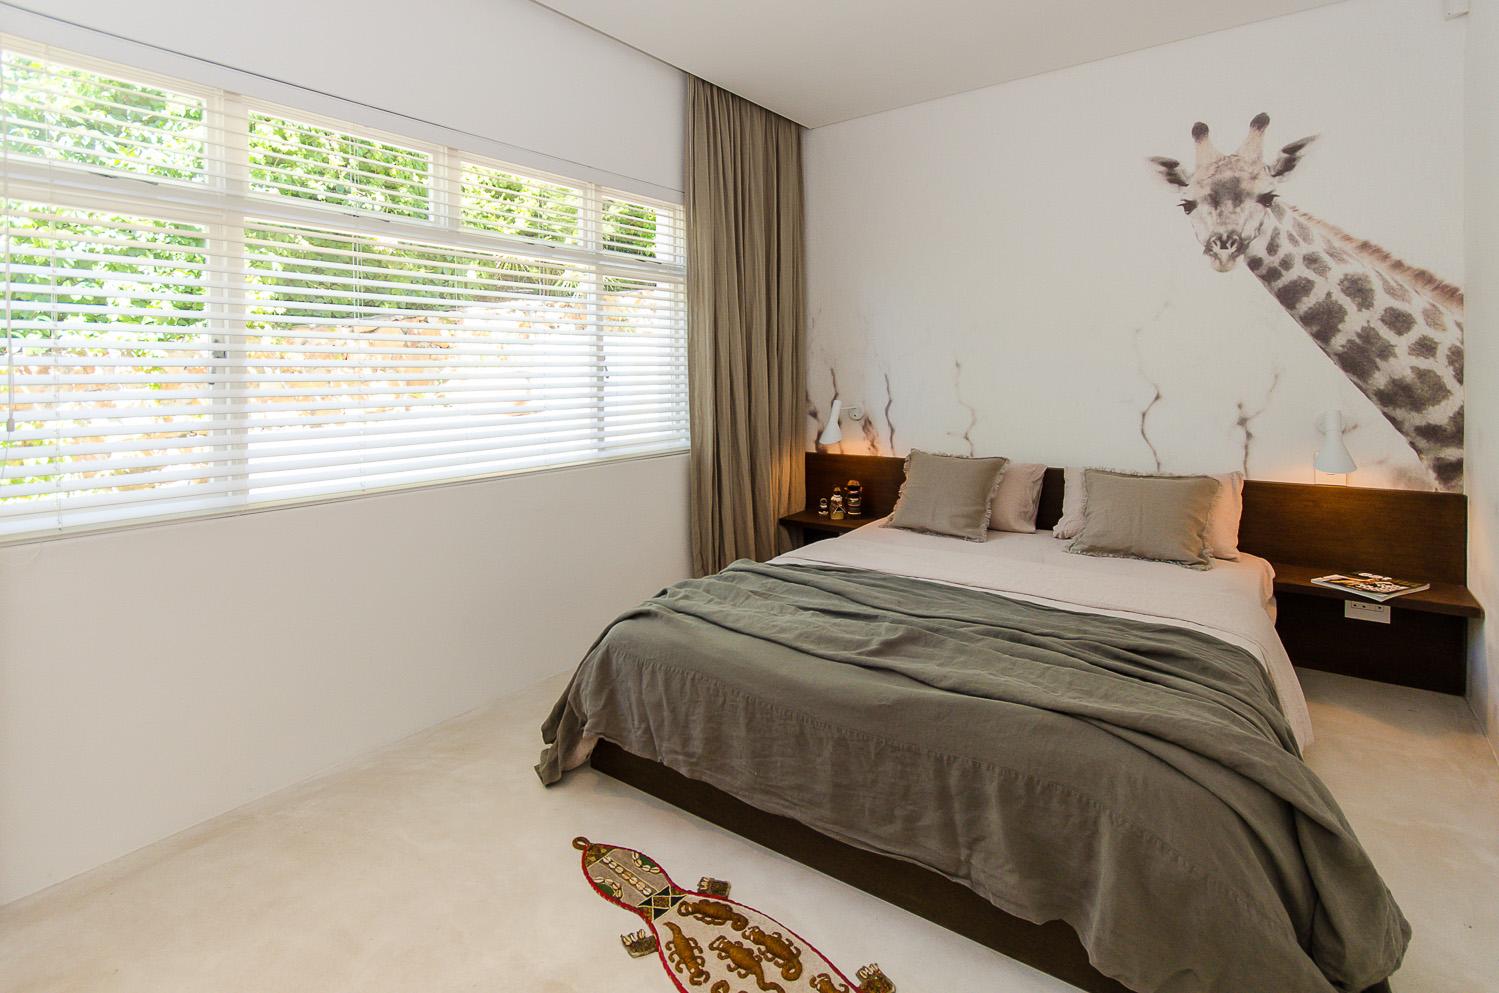 Photo 17 of Strathmore Dream accommodation in Camps Bay, Cape Town with 4 bedrooms and 3 bathrooms